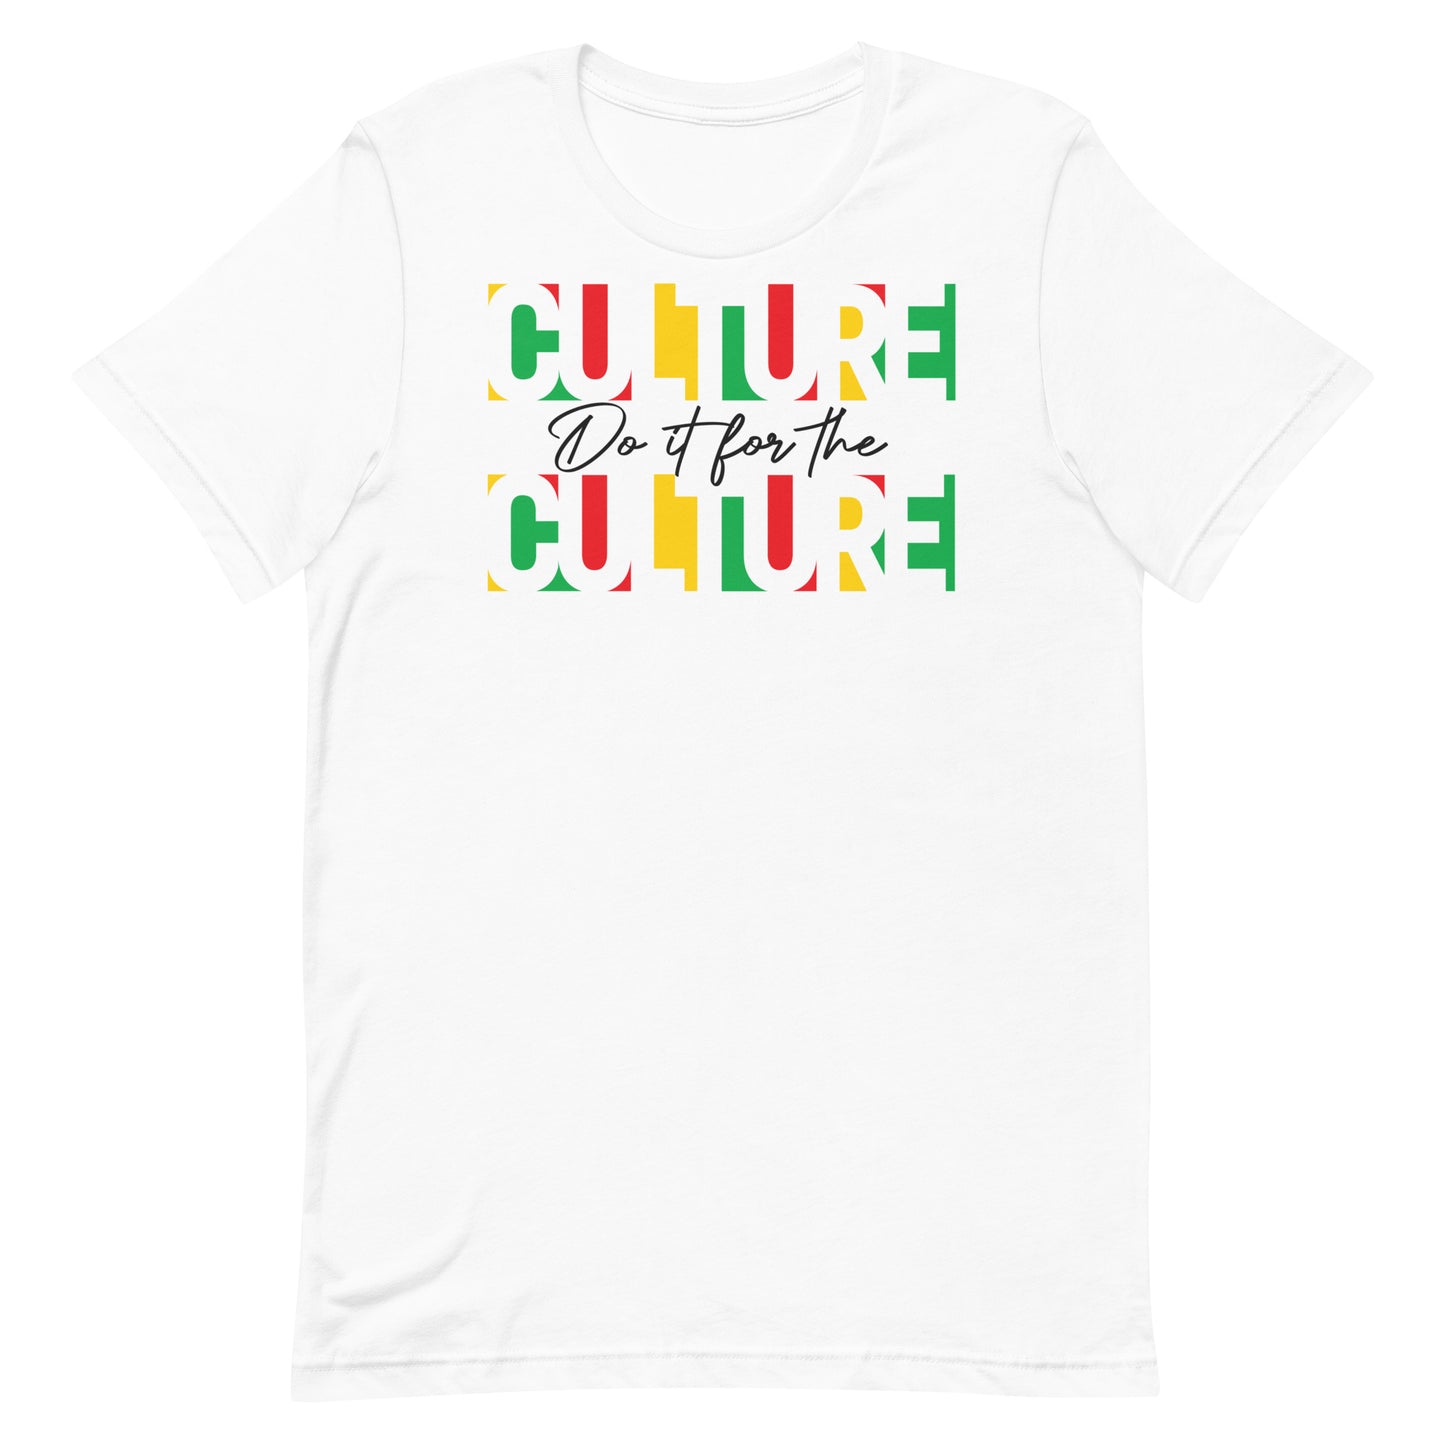 Do It For The Culture Premium Soft Adult Unisex Tee